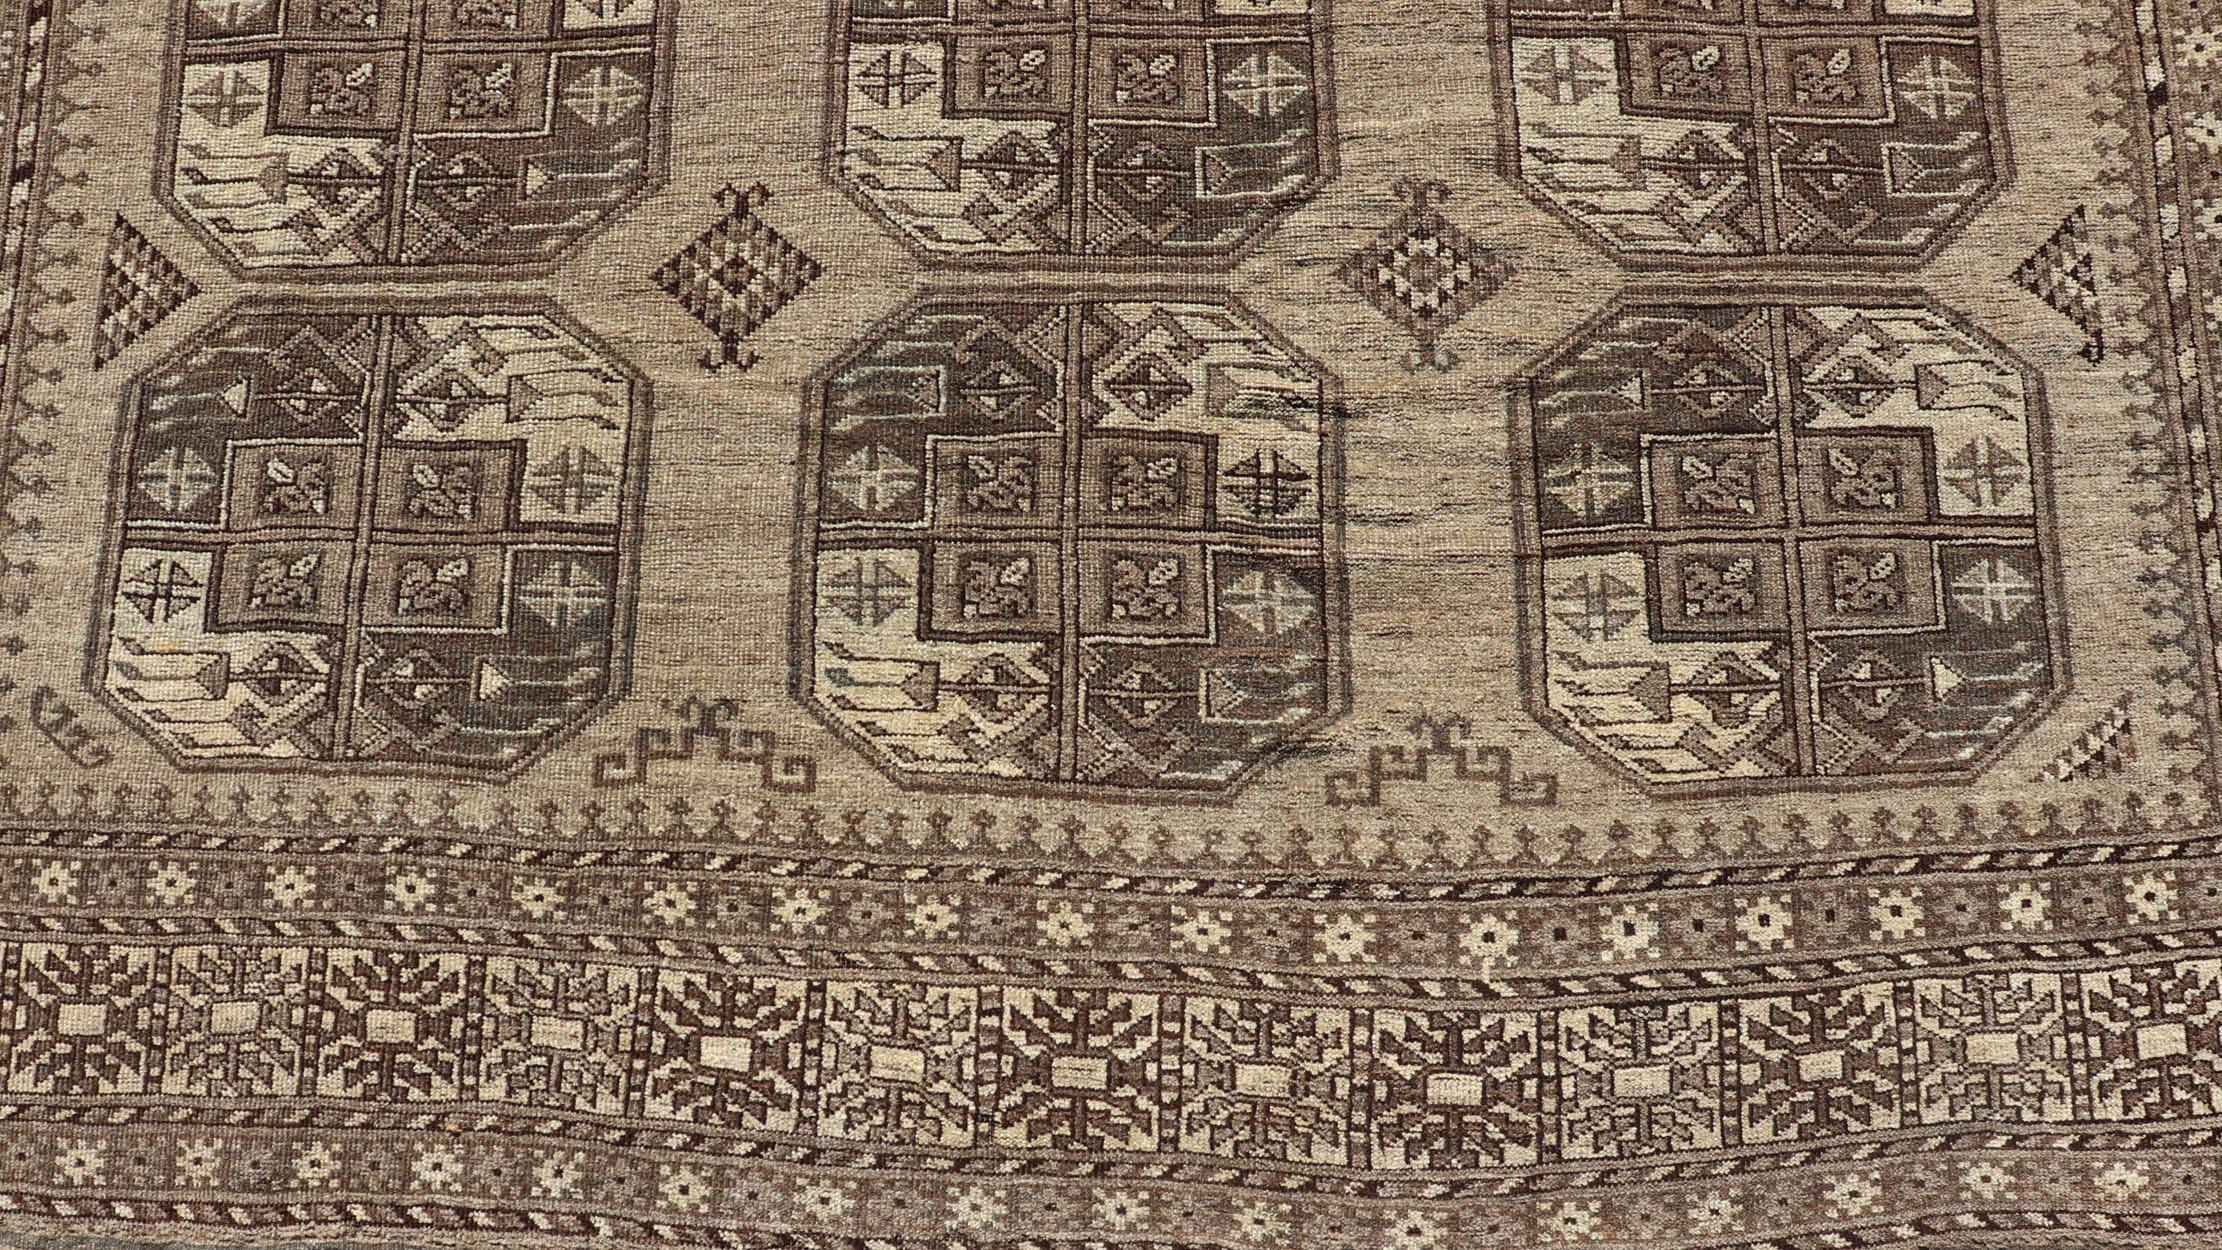 Hand-Knotted Turkomen Ersari Rug in Wool with All-Over Repeating Gul Design For Sale 5